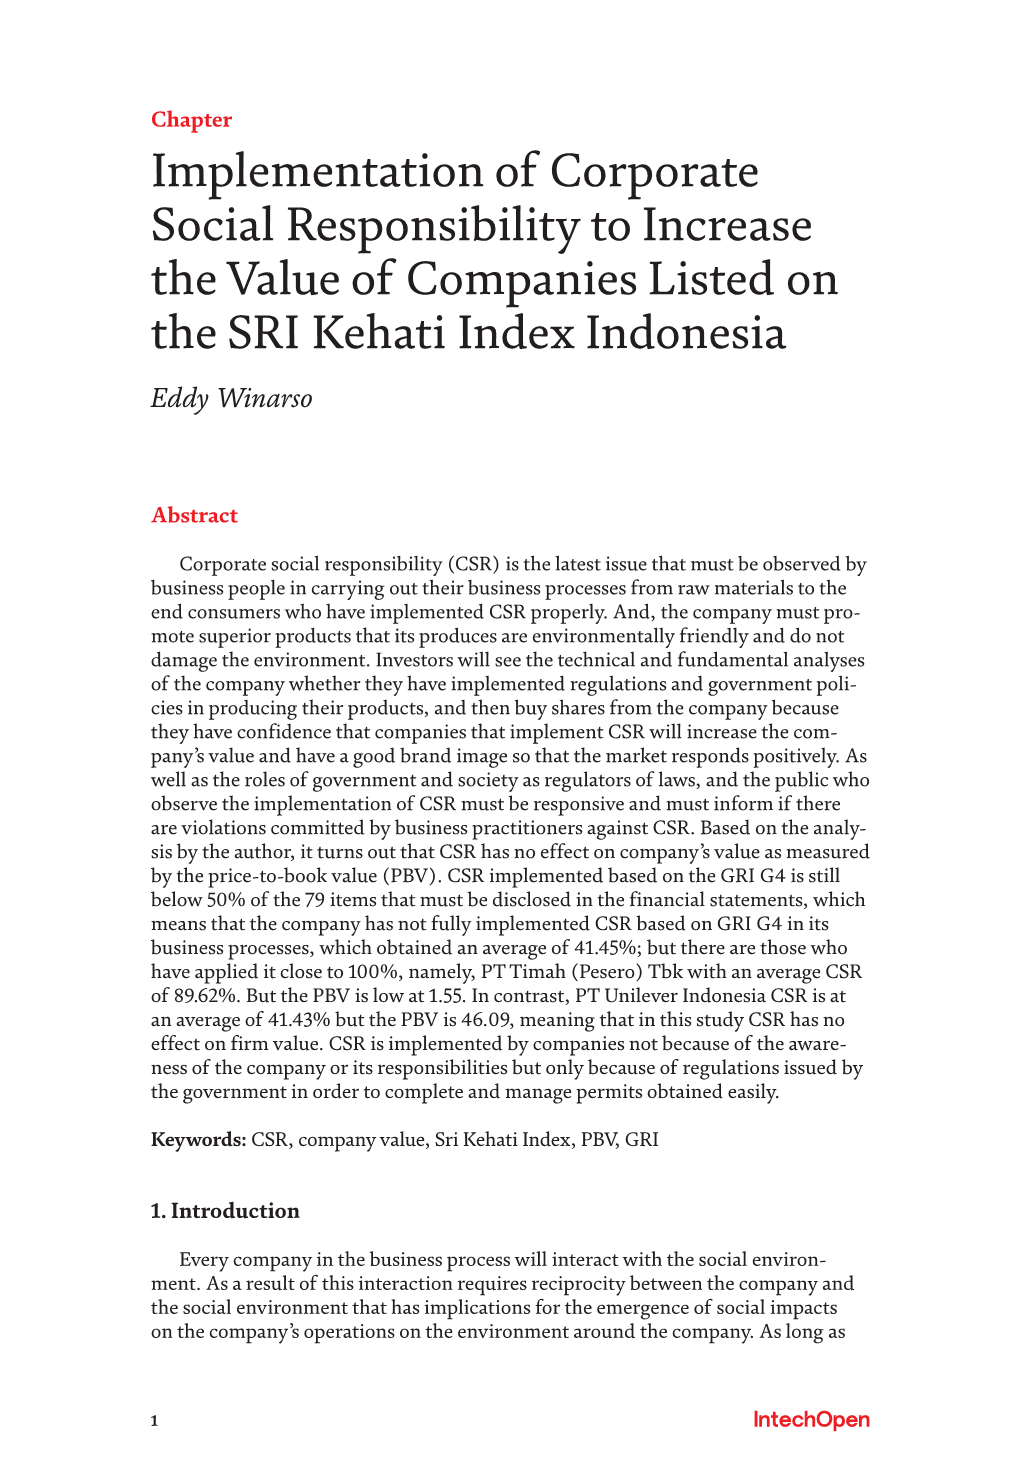 Implementation of Corporate Social Responsibility to Increase the Value of Companies Listed on the SRI Kehati Index Indonesia Eddy Winarso